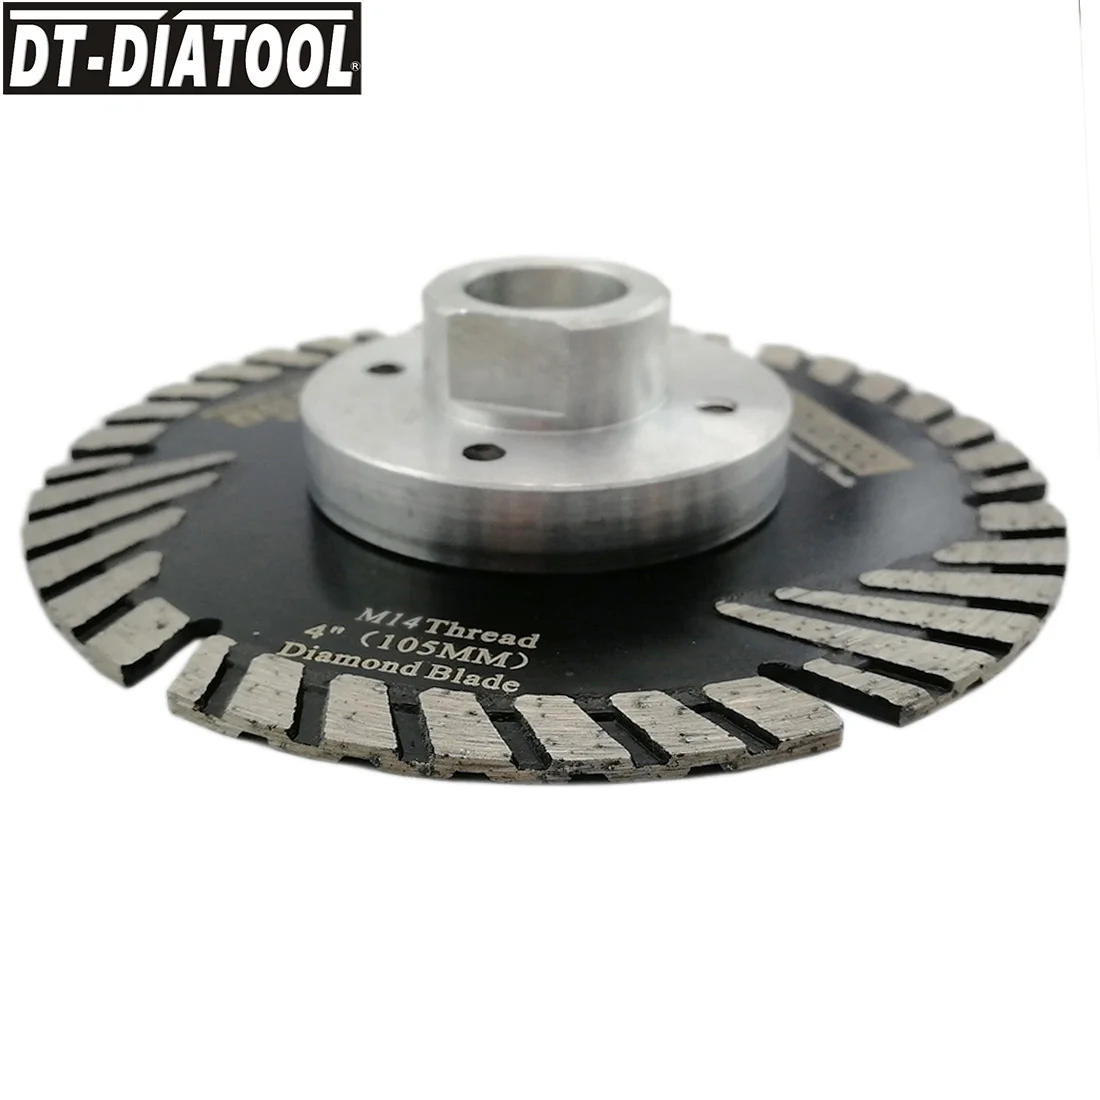 DT-DIATOOL 1pc Diamond Cutting Disc Saw Blade Stone Granite Marbel  Brick Tile Concrete With Slant Protection Teeth M14 Thread images - 6